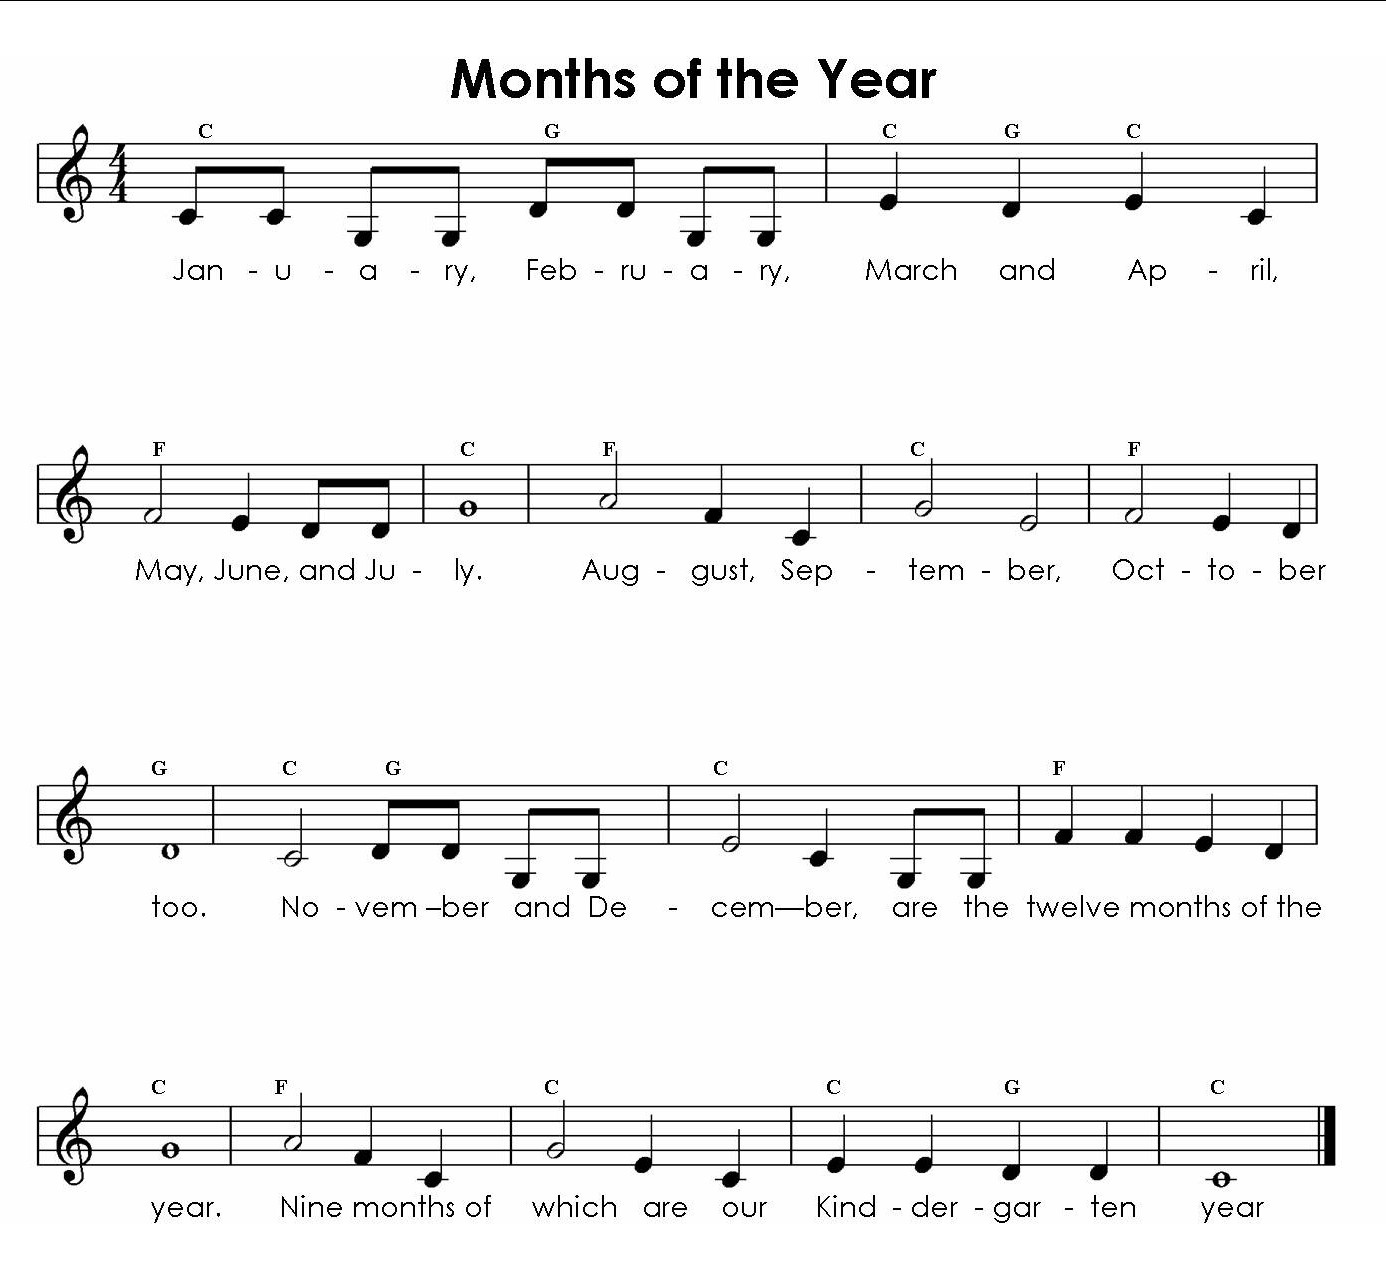 Months of the Year Song - 12 Months of the Year - Kids Songs by